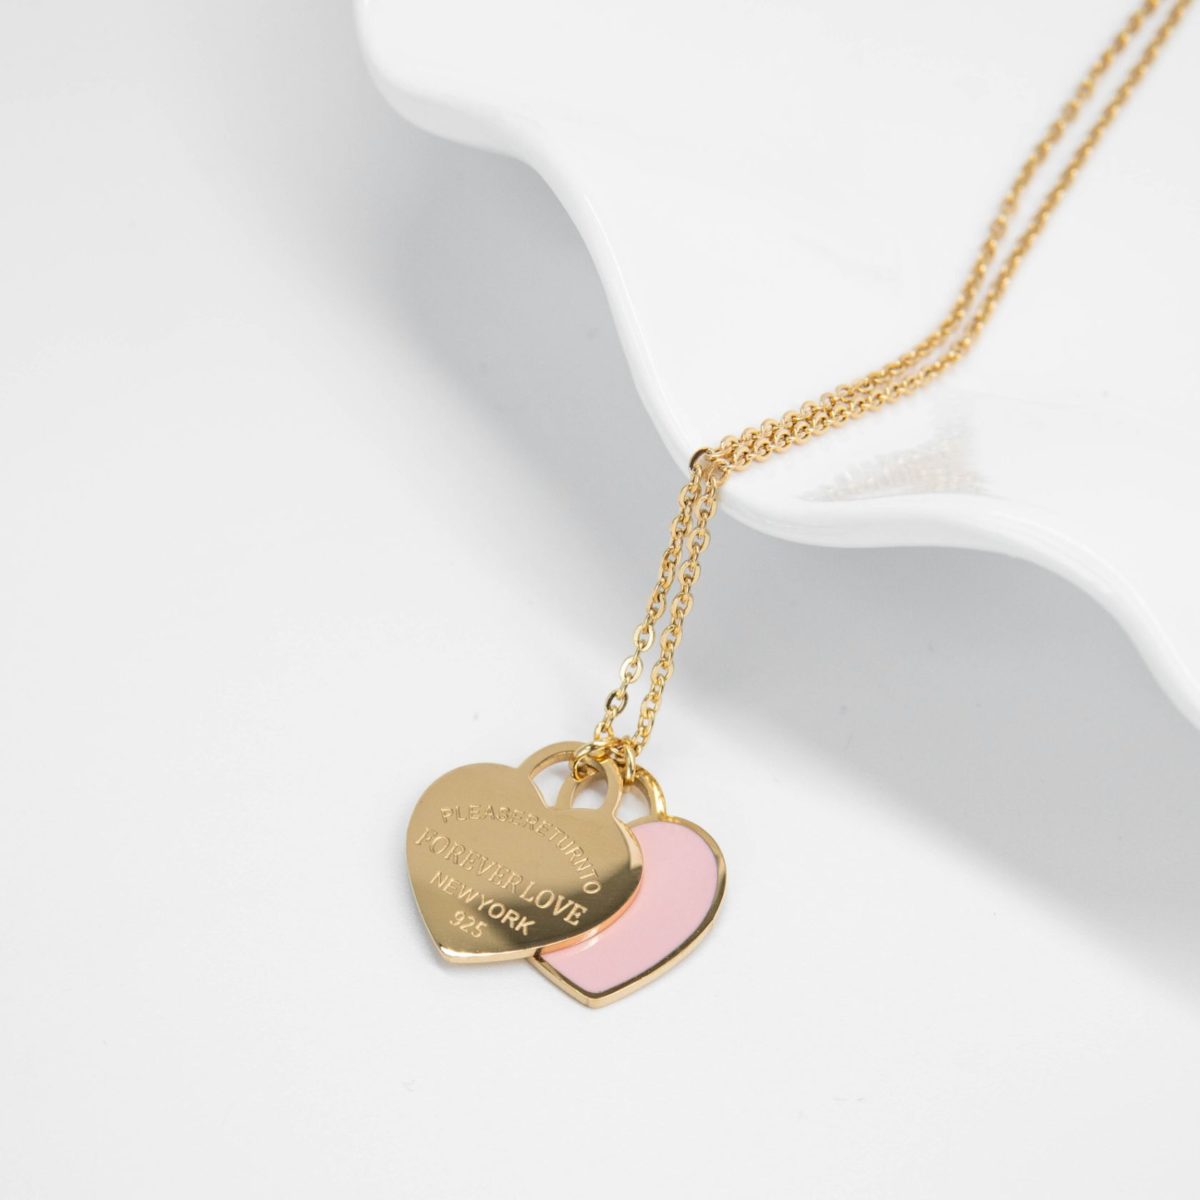 https://m.clubbella.co/product/theresa-gold-pink-enamel-necklace/ Theresa necklace - Pink Gold (6)